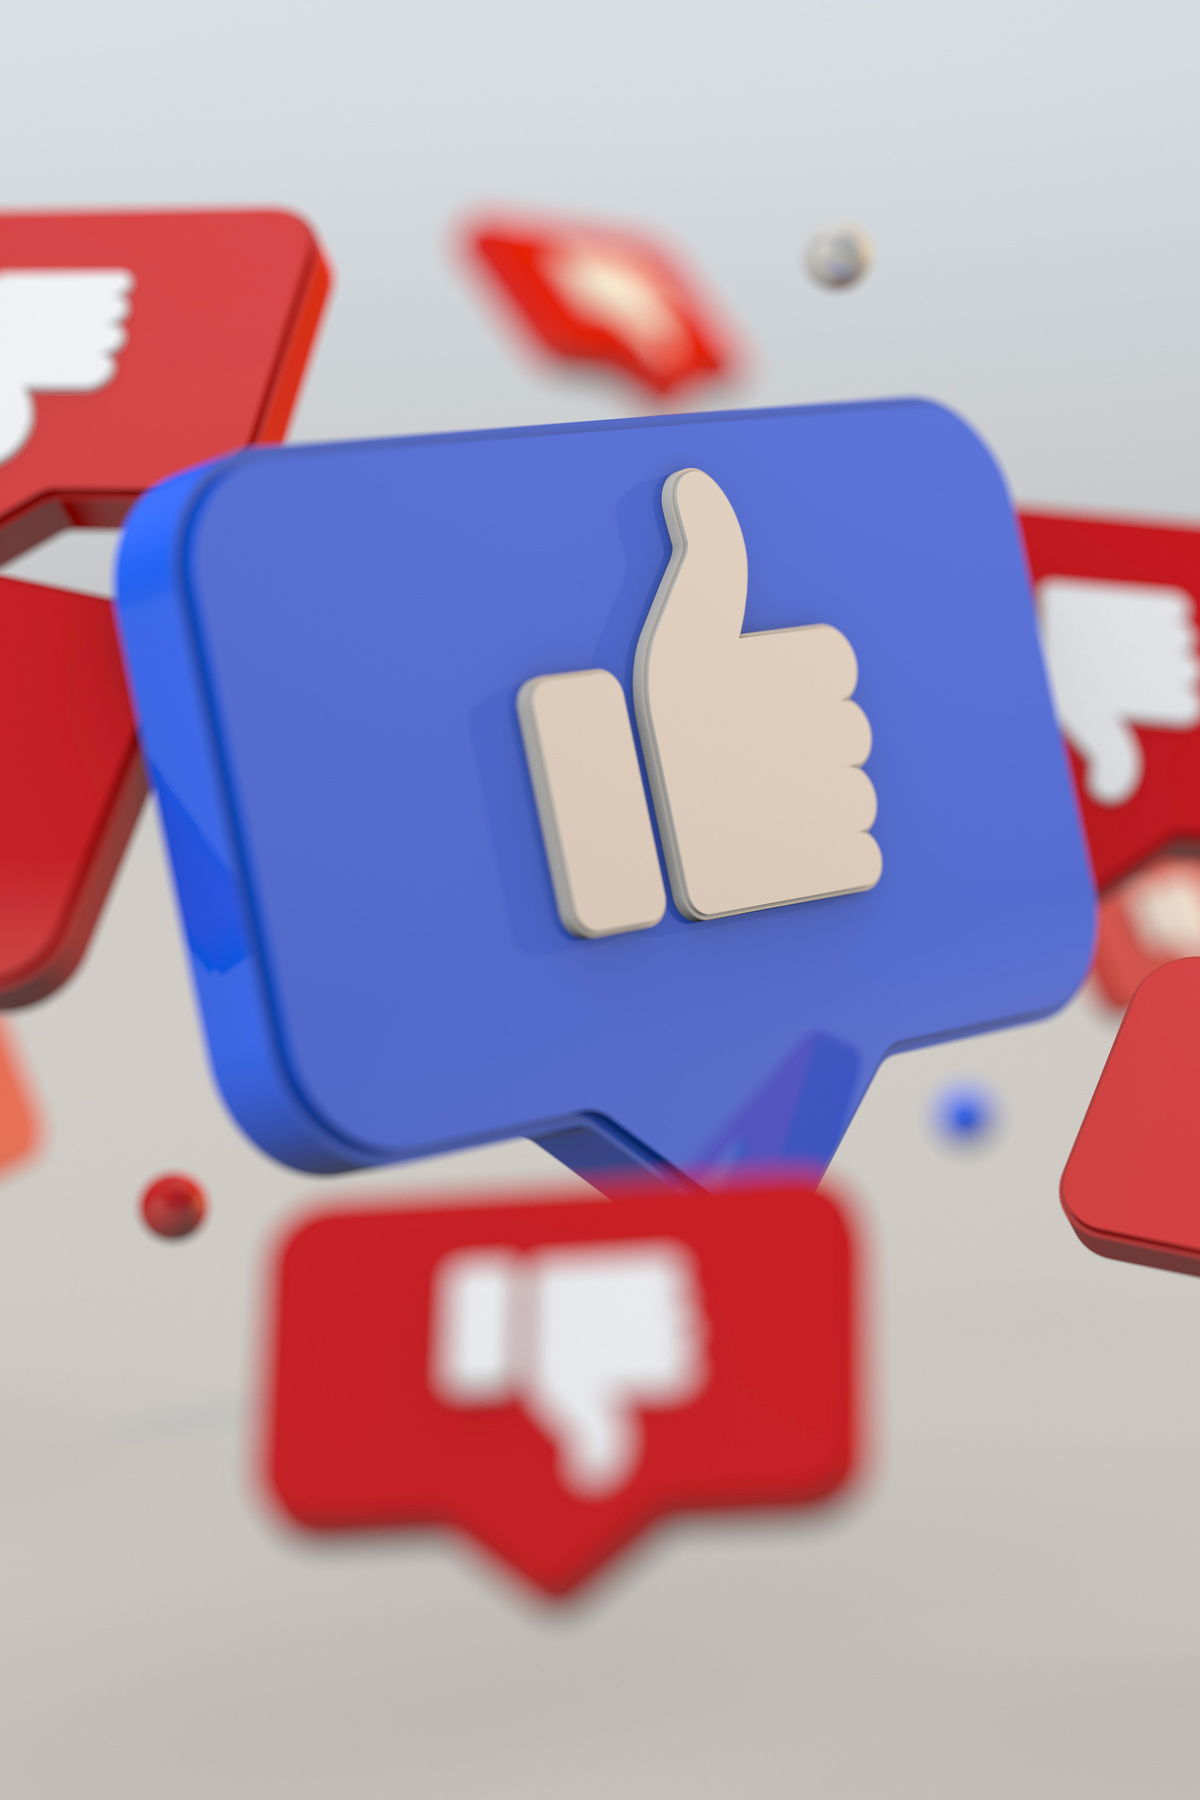 3d like icon a social network concept